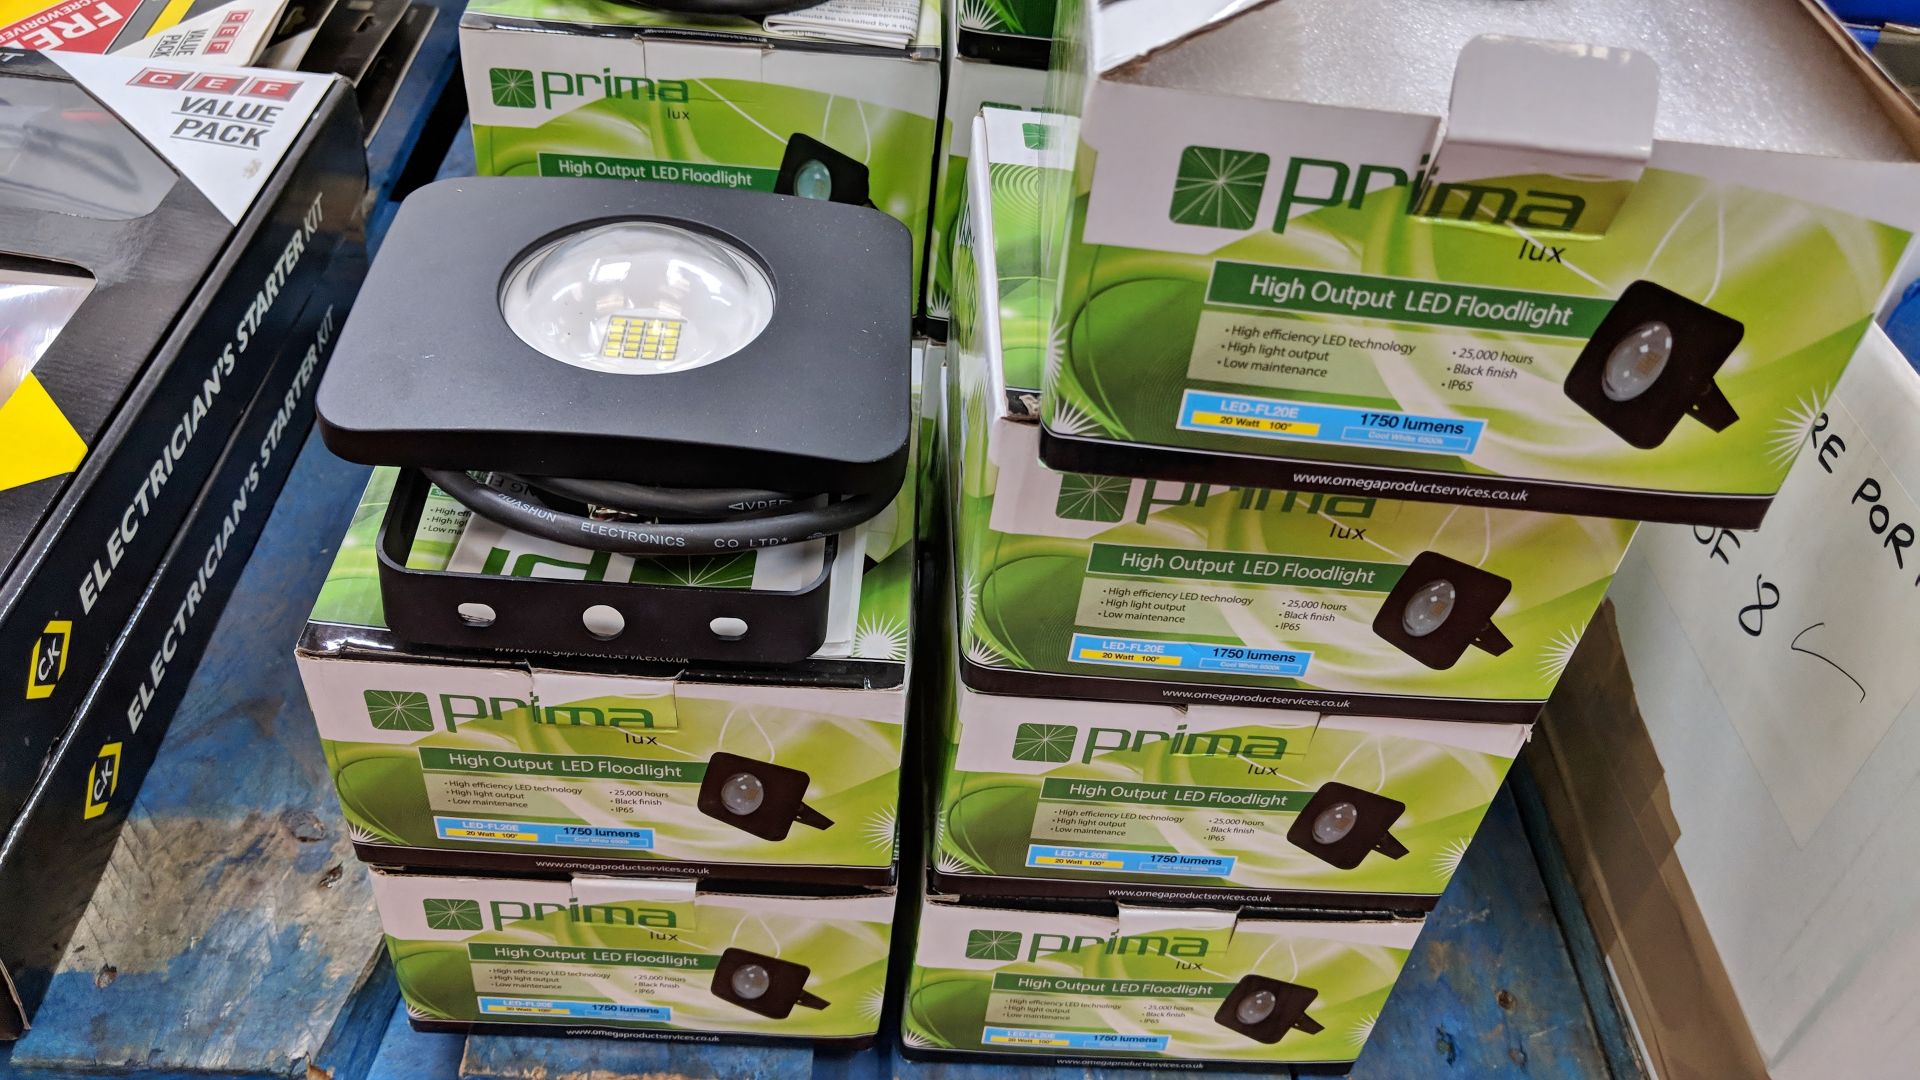 6 off Prima Lux IP65 High Output LED floodlights - 20W, 1,750 lumens The vast majority of products - Bild 3 aus 3